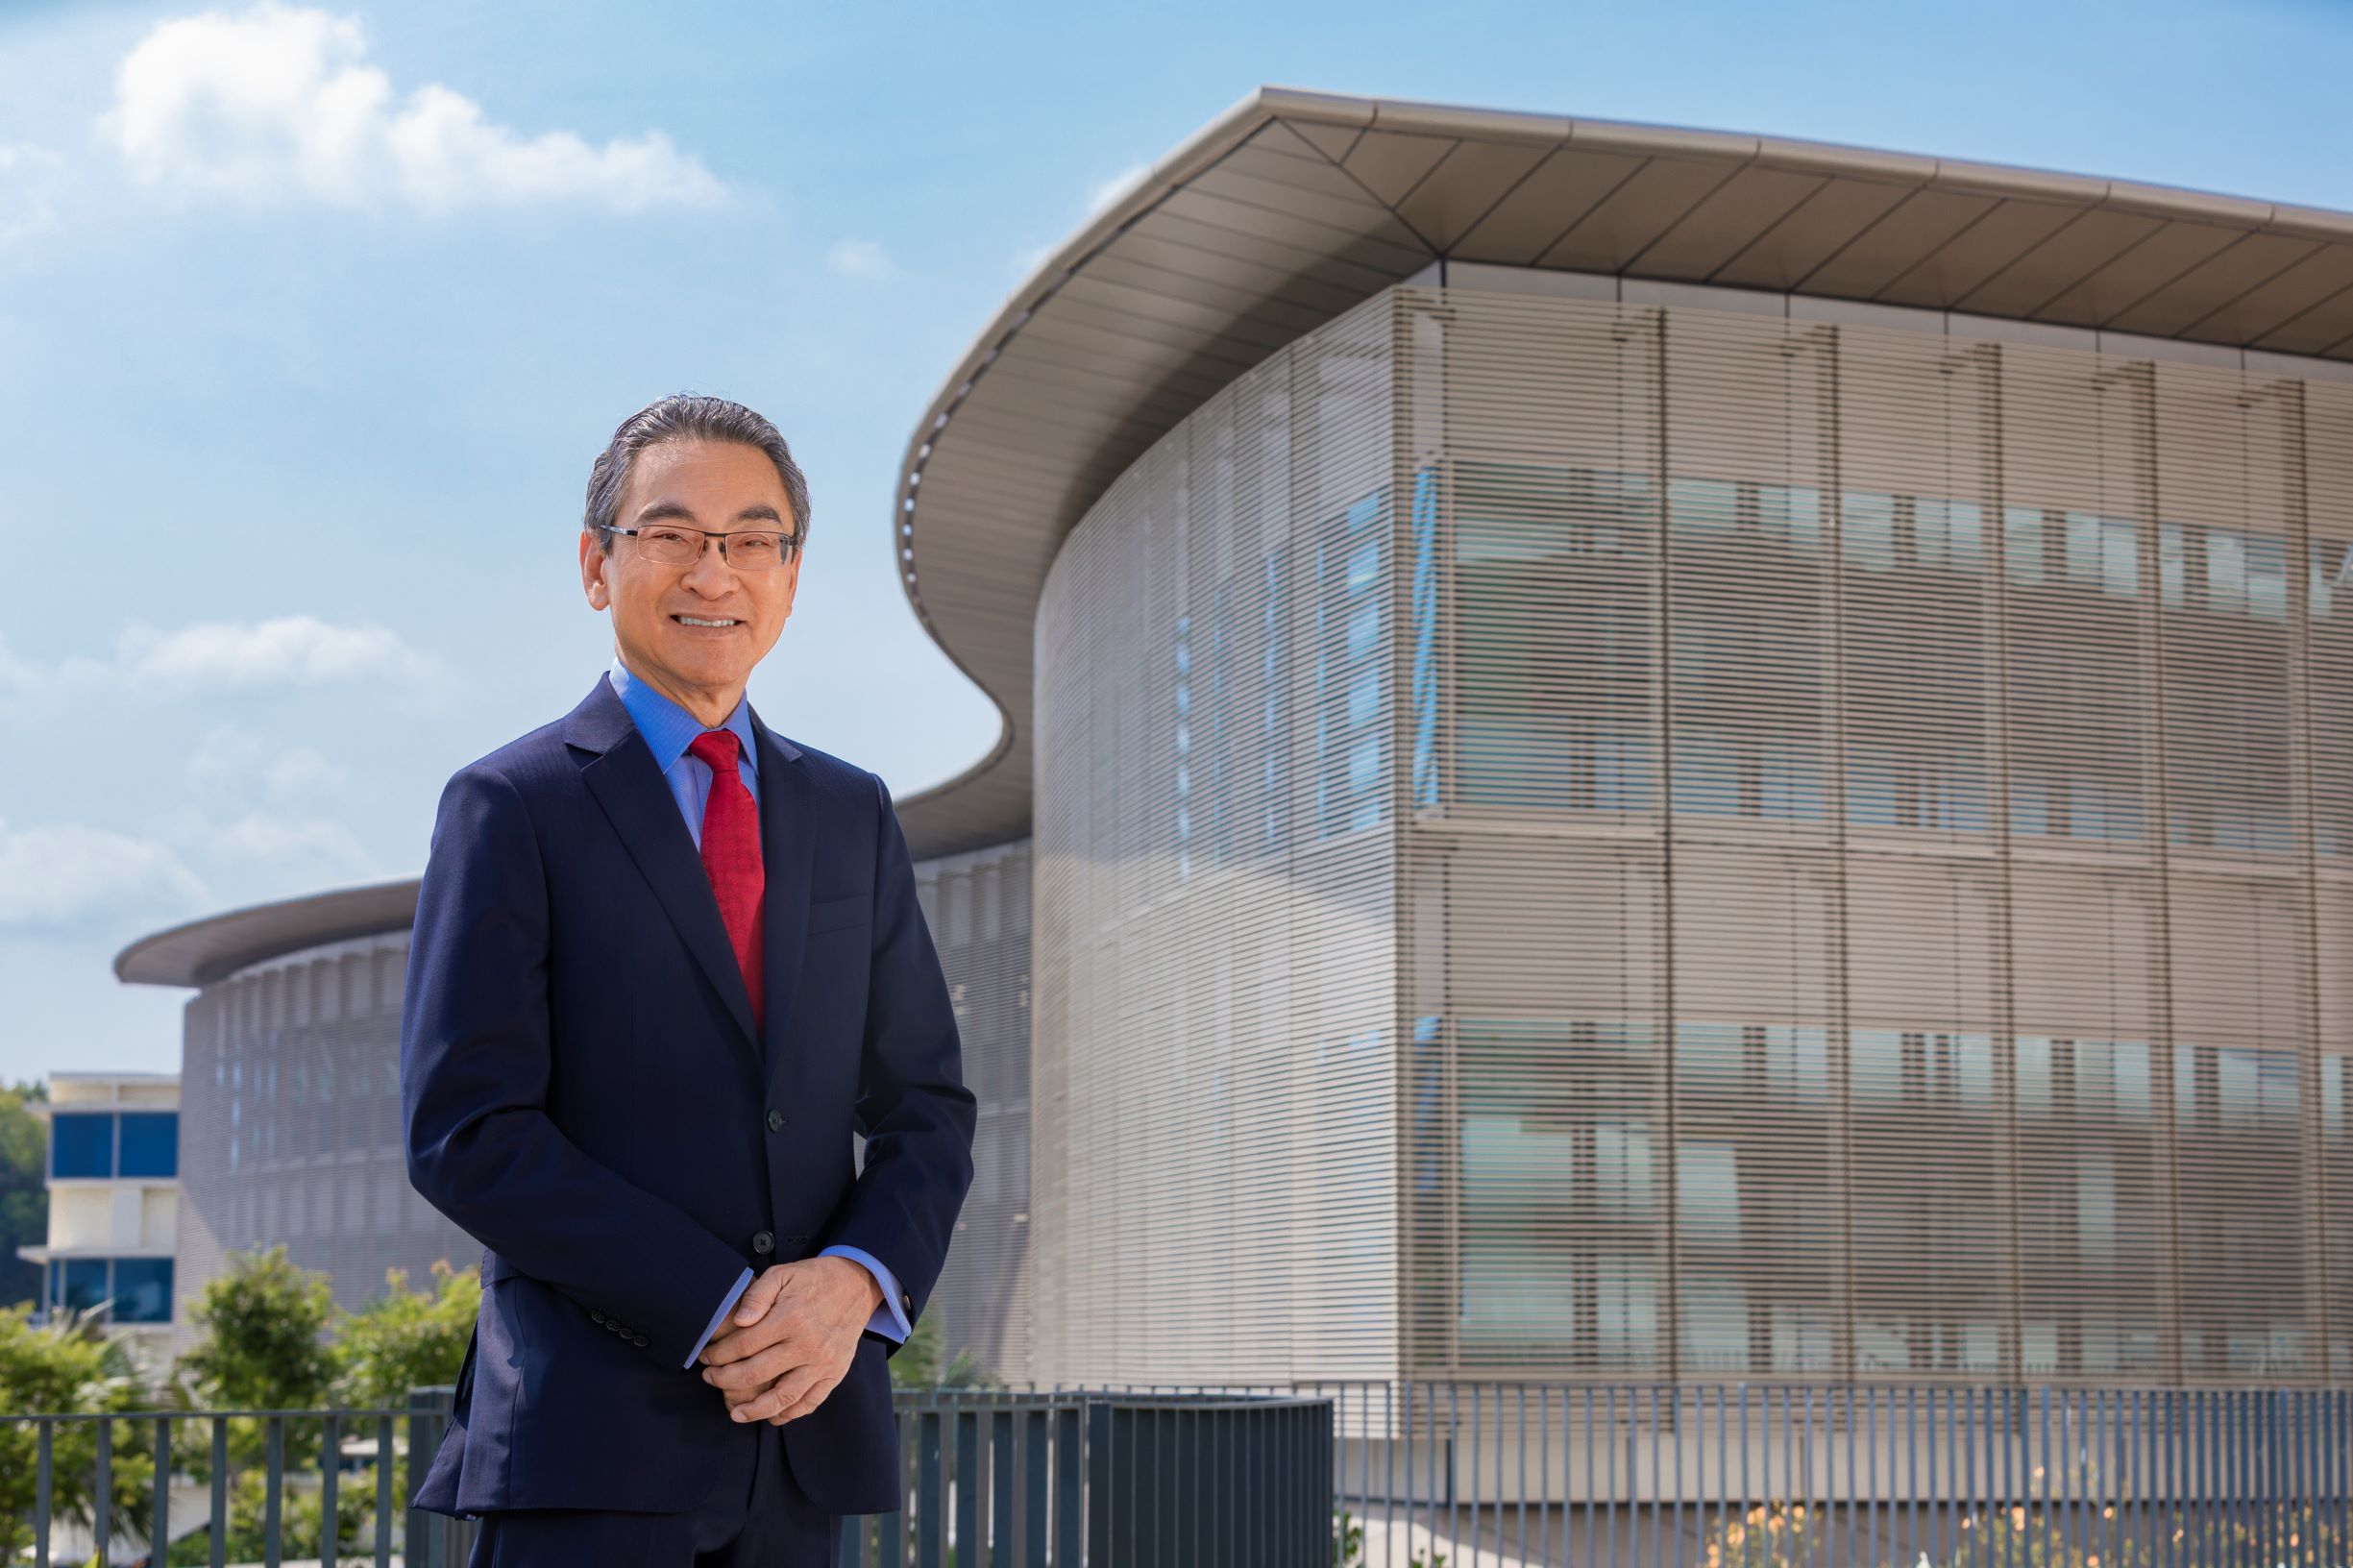 NTU Chairman Koh Boon Hwee in front of the Arc